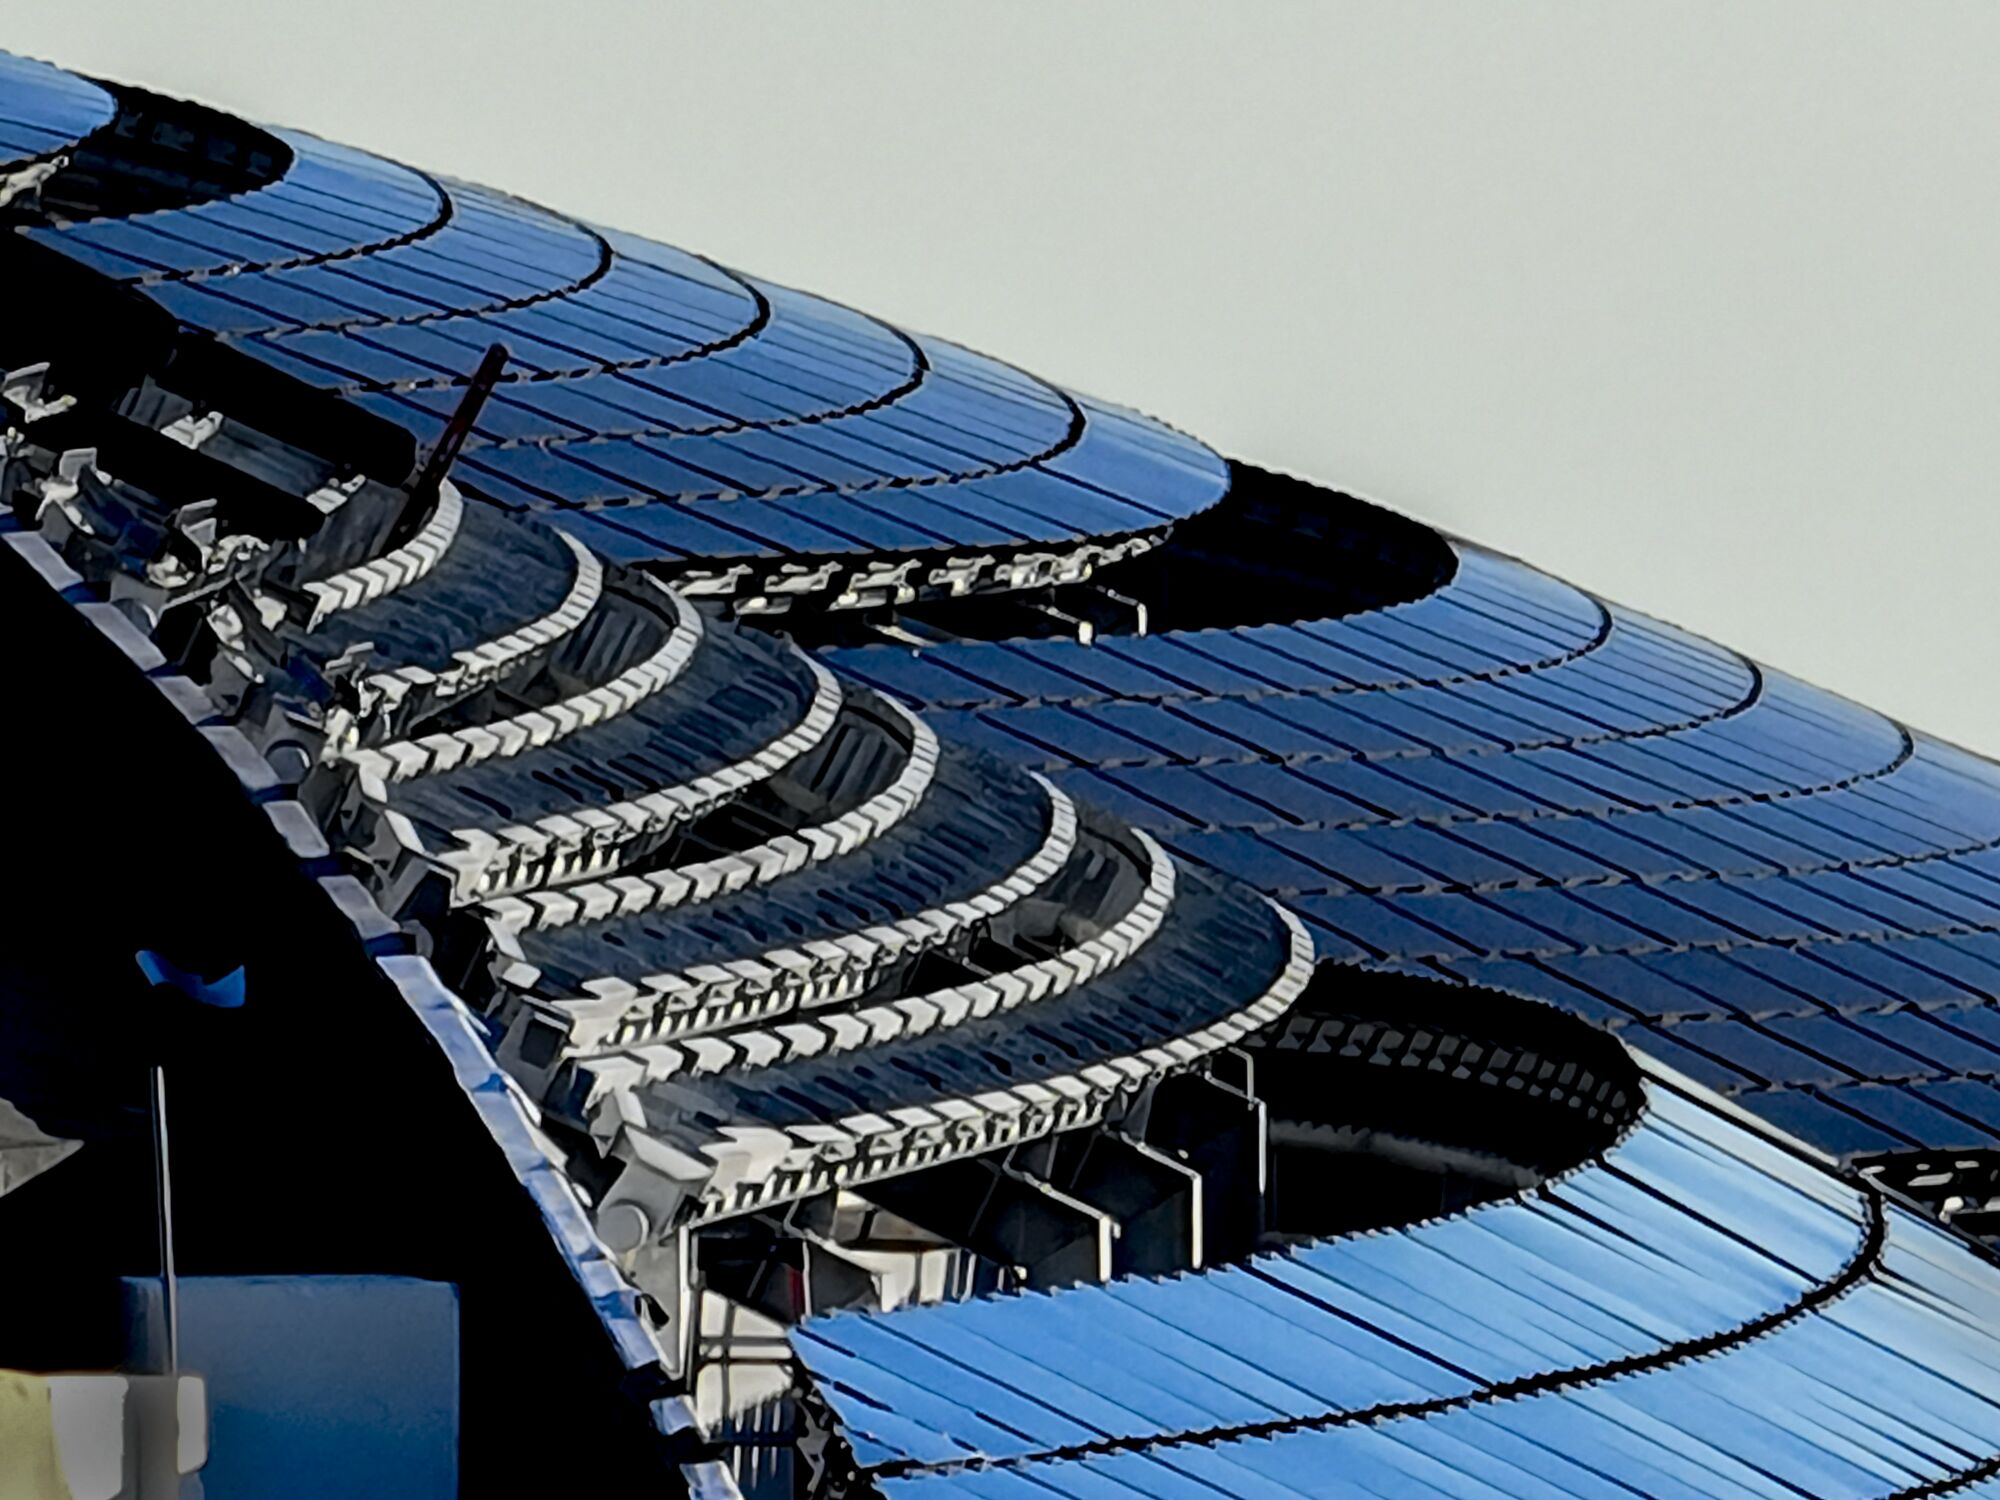 A view of solar panels on the roof of the Lucas Museum of Narrative Art under construction in Exposition Park.